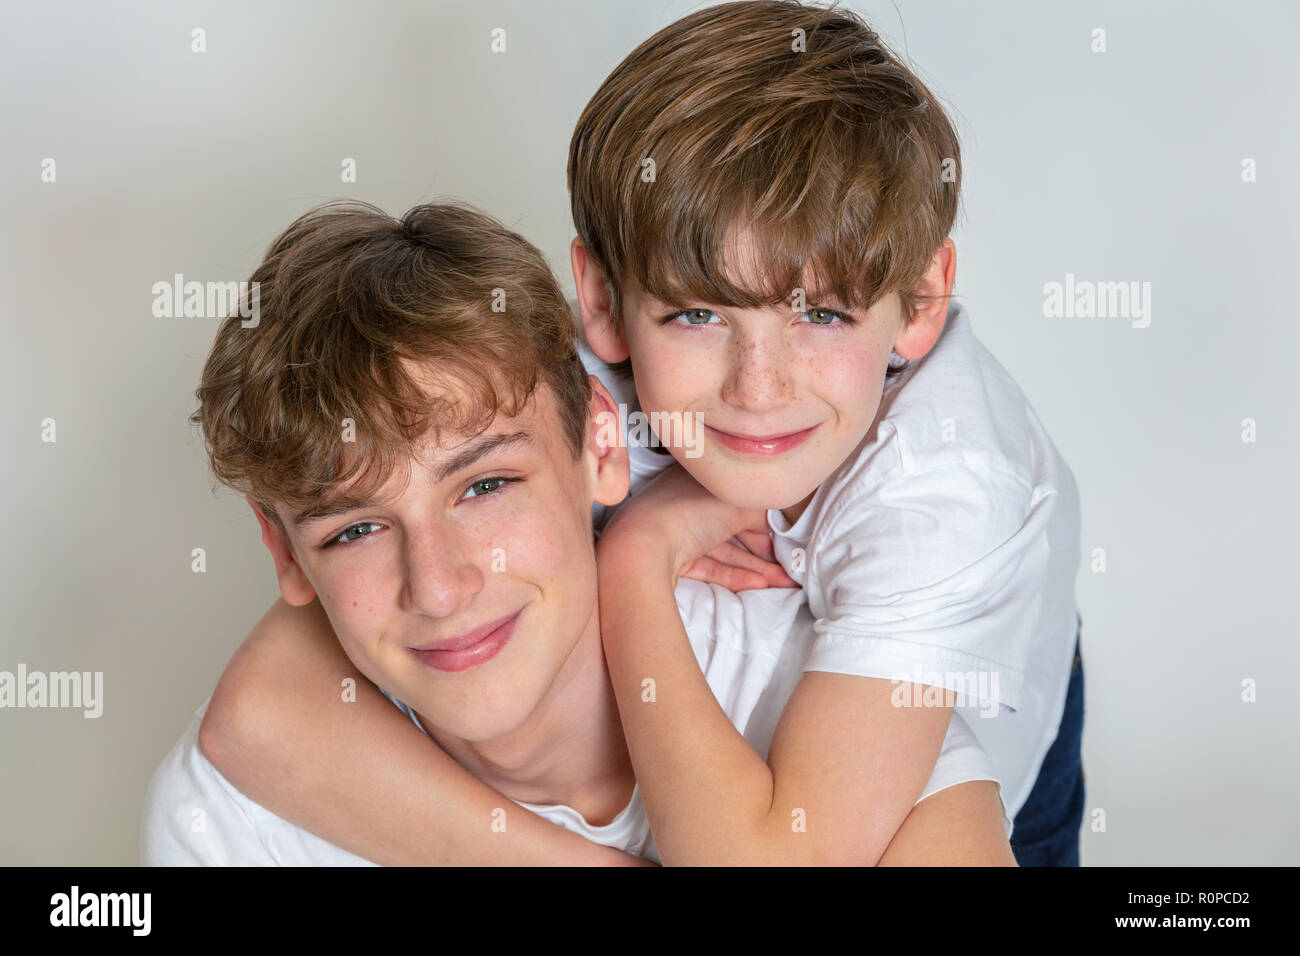 White background studio photograph of young happy boy children brothers smiling together Stock Photo